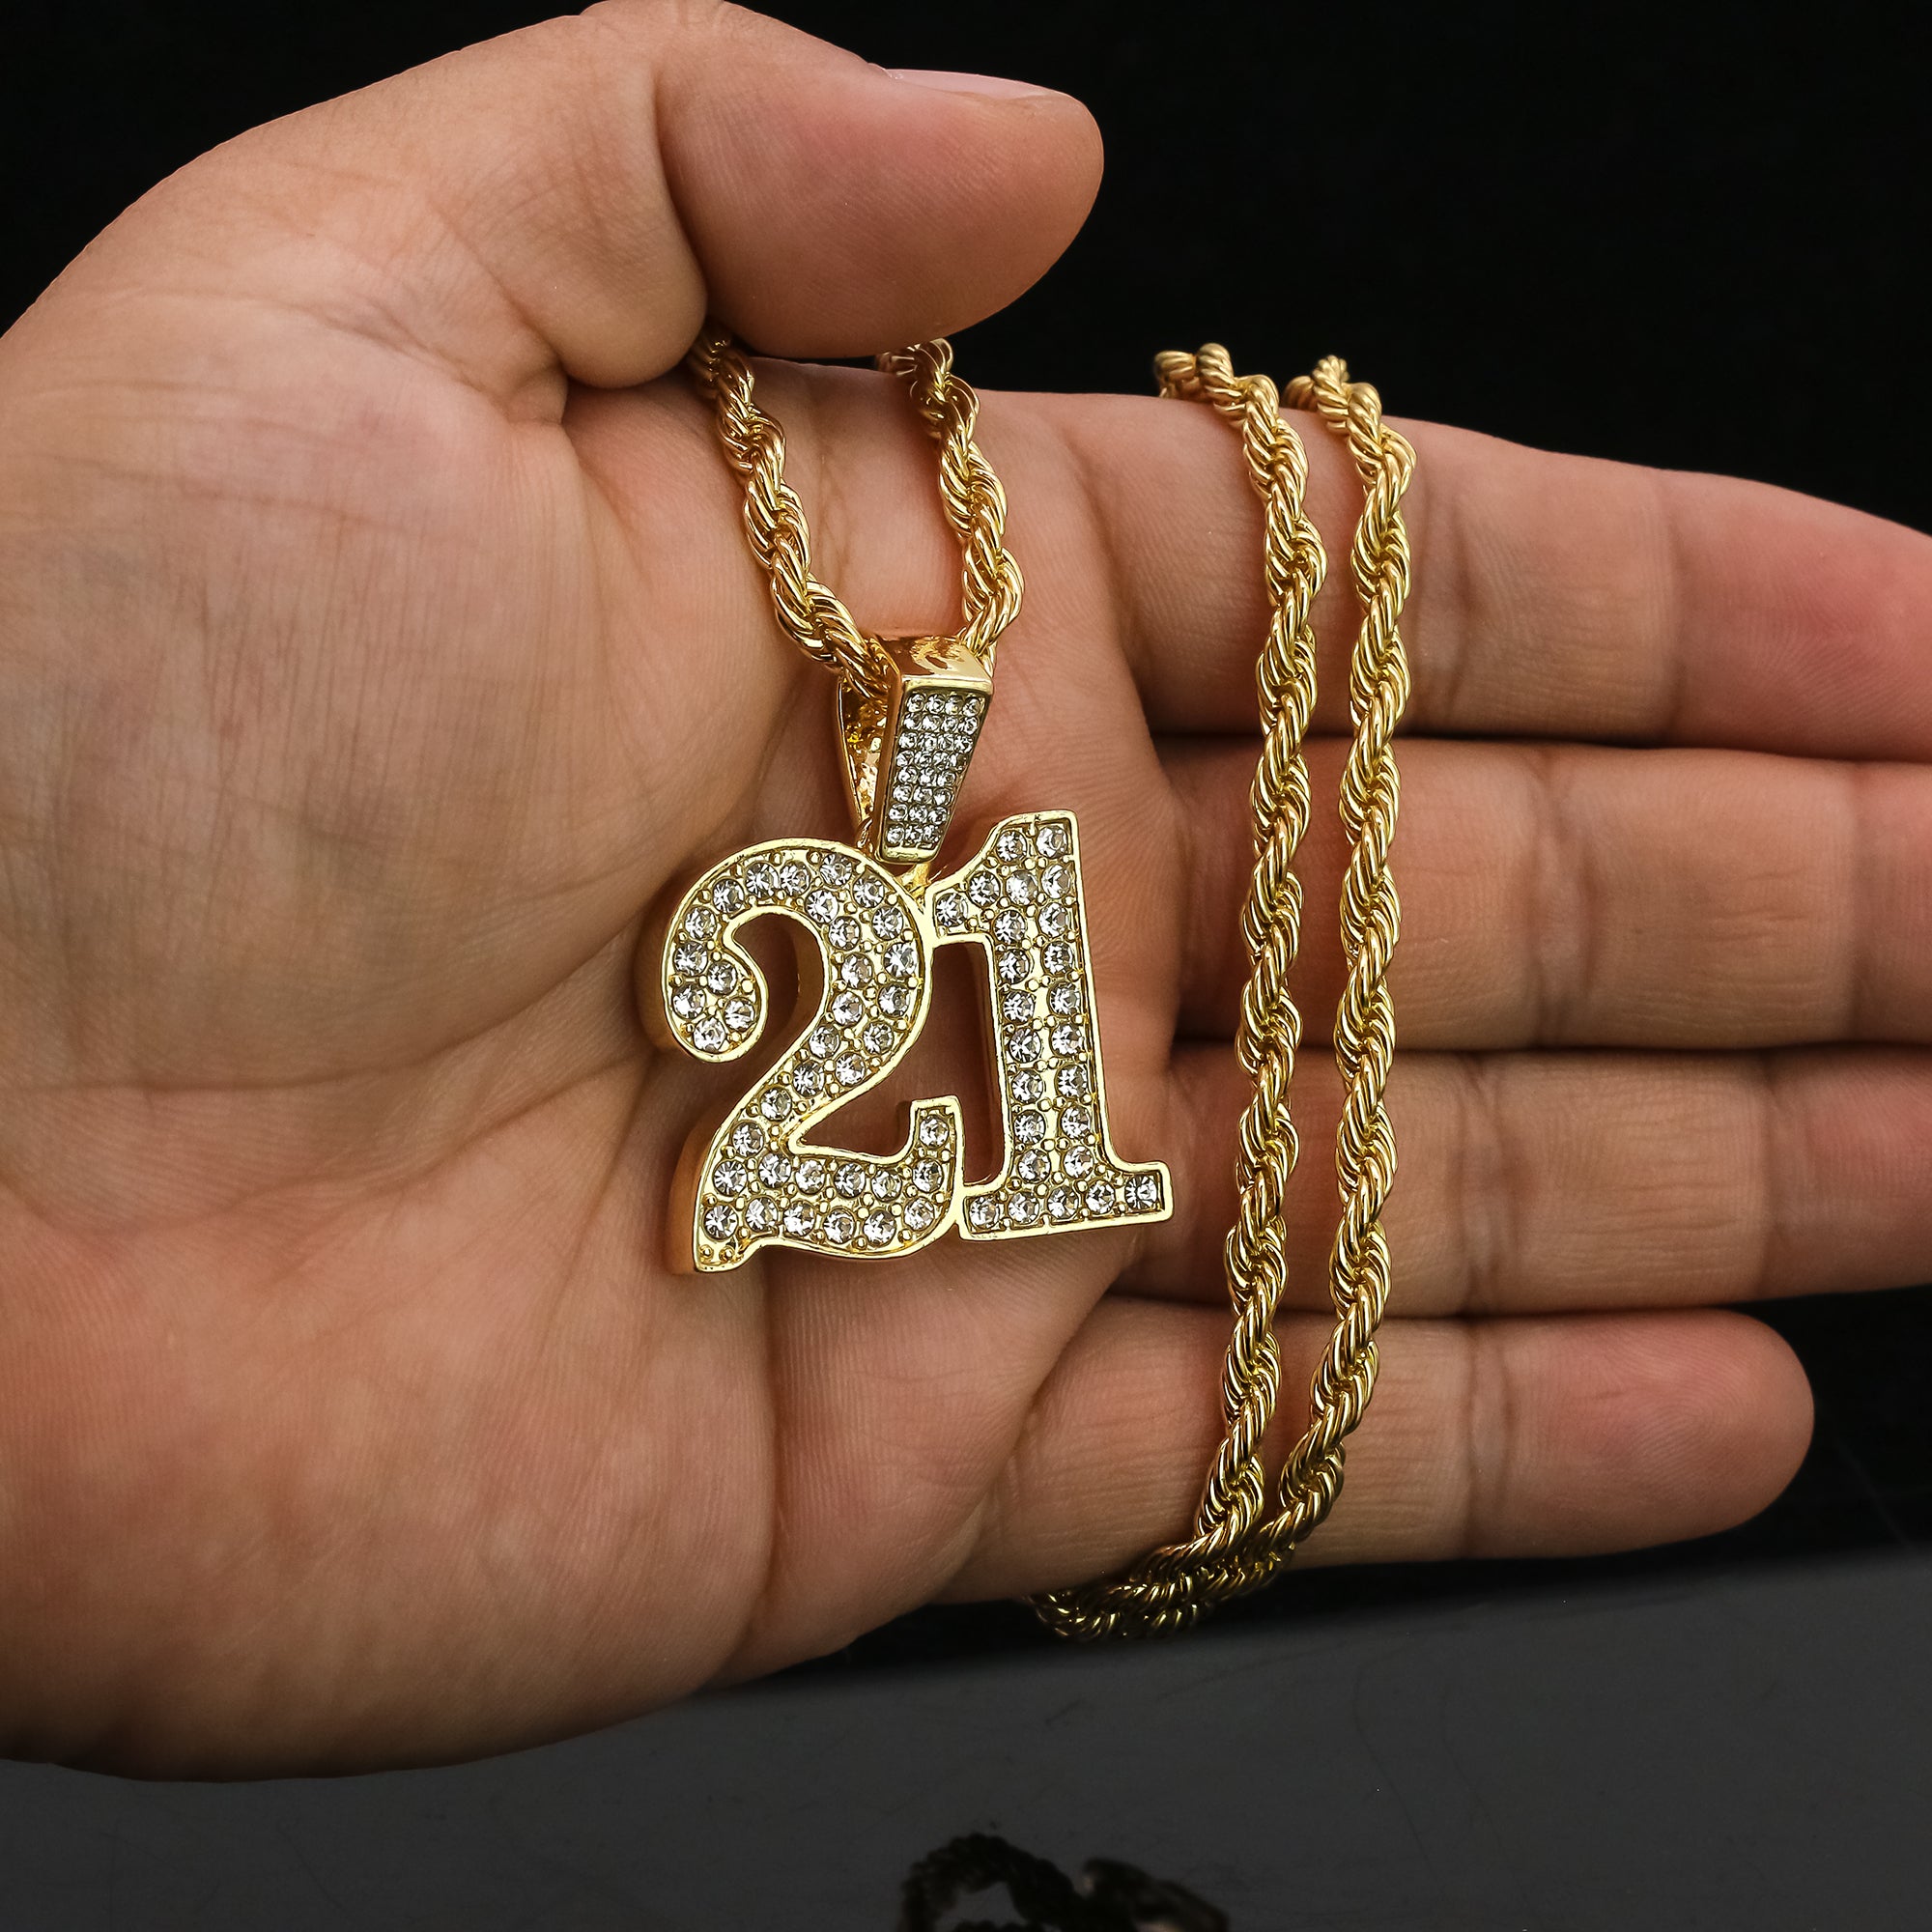 21 Pendant 24" Rope Chain Men's 18k Gold Plated Jewelry